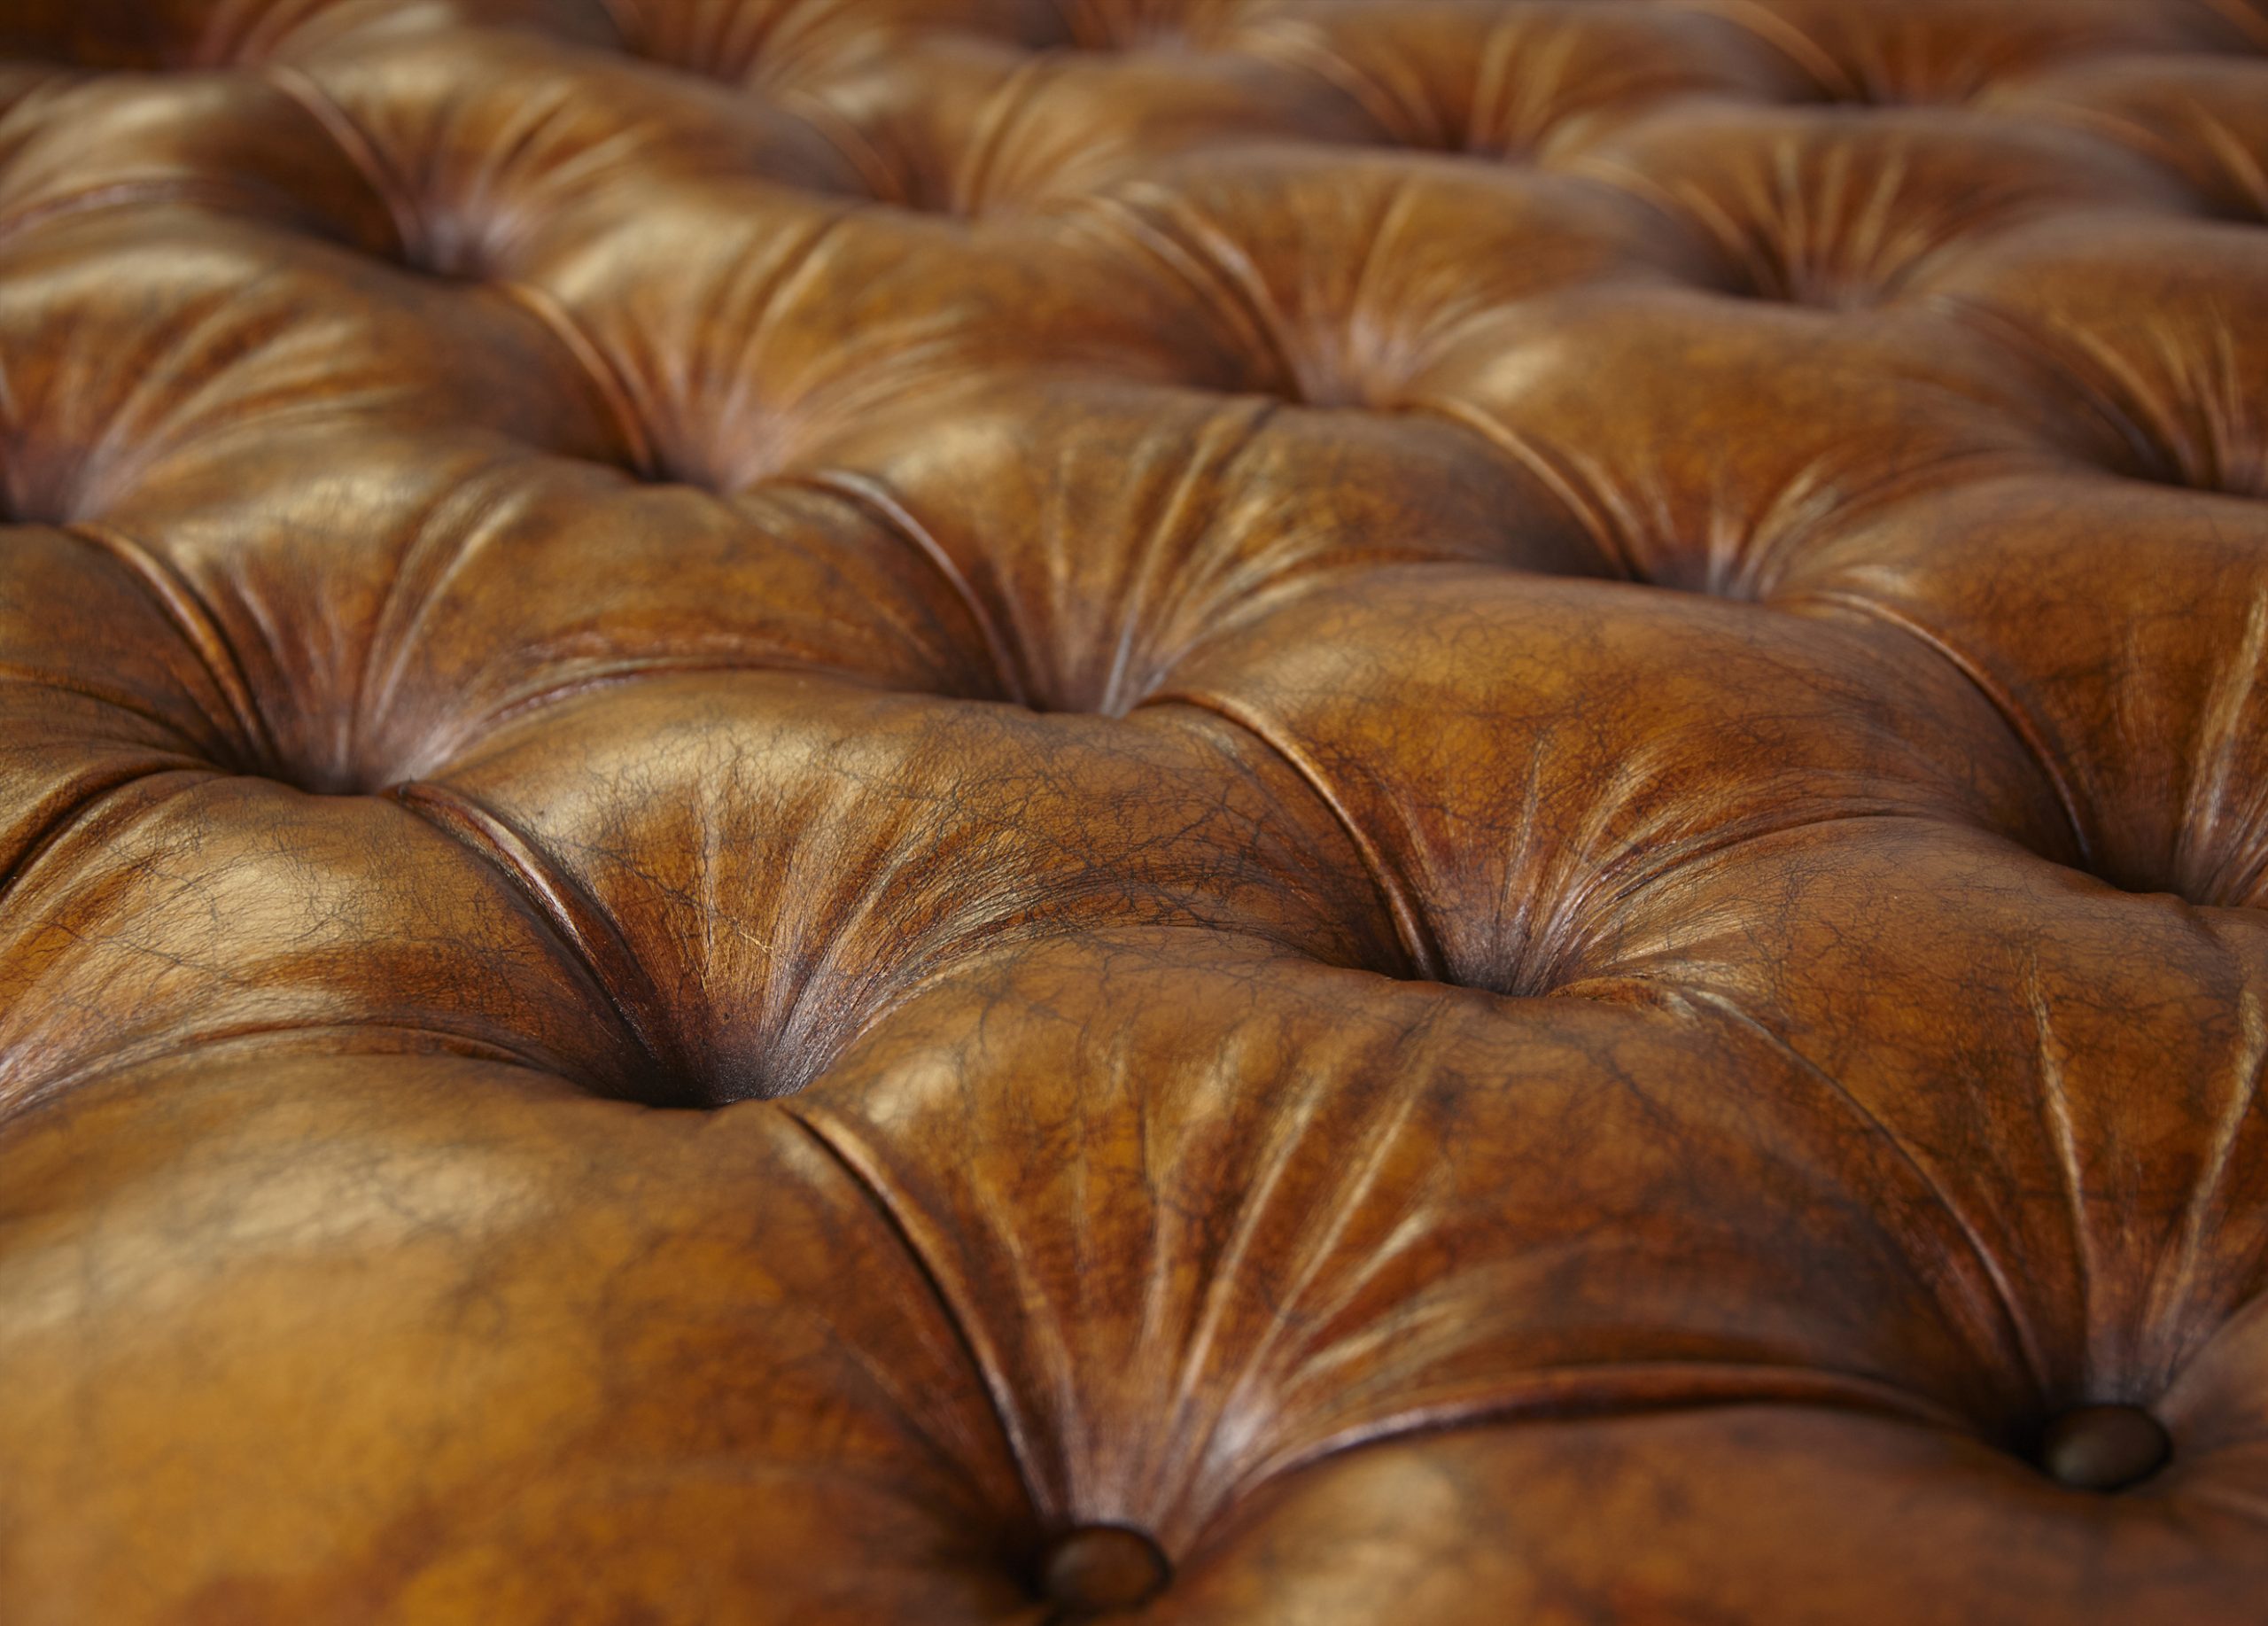 Brown leather ottoman